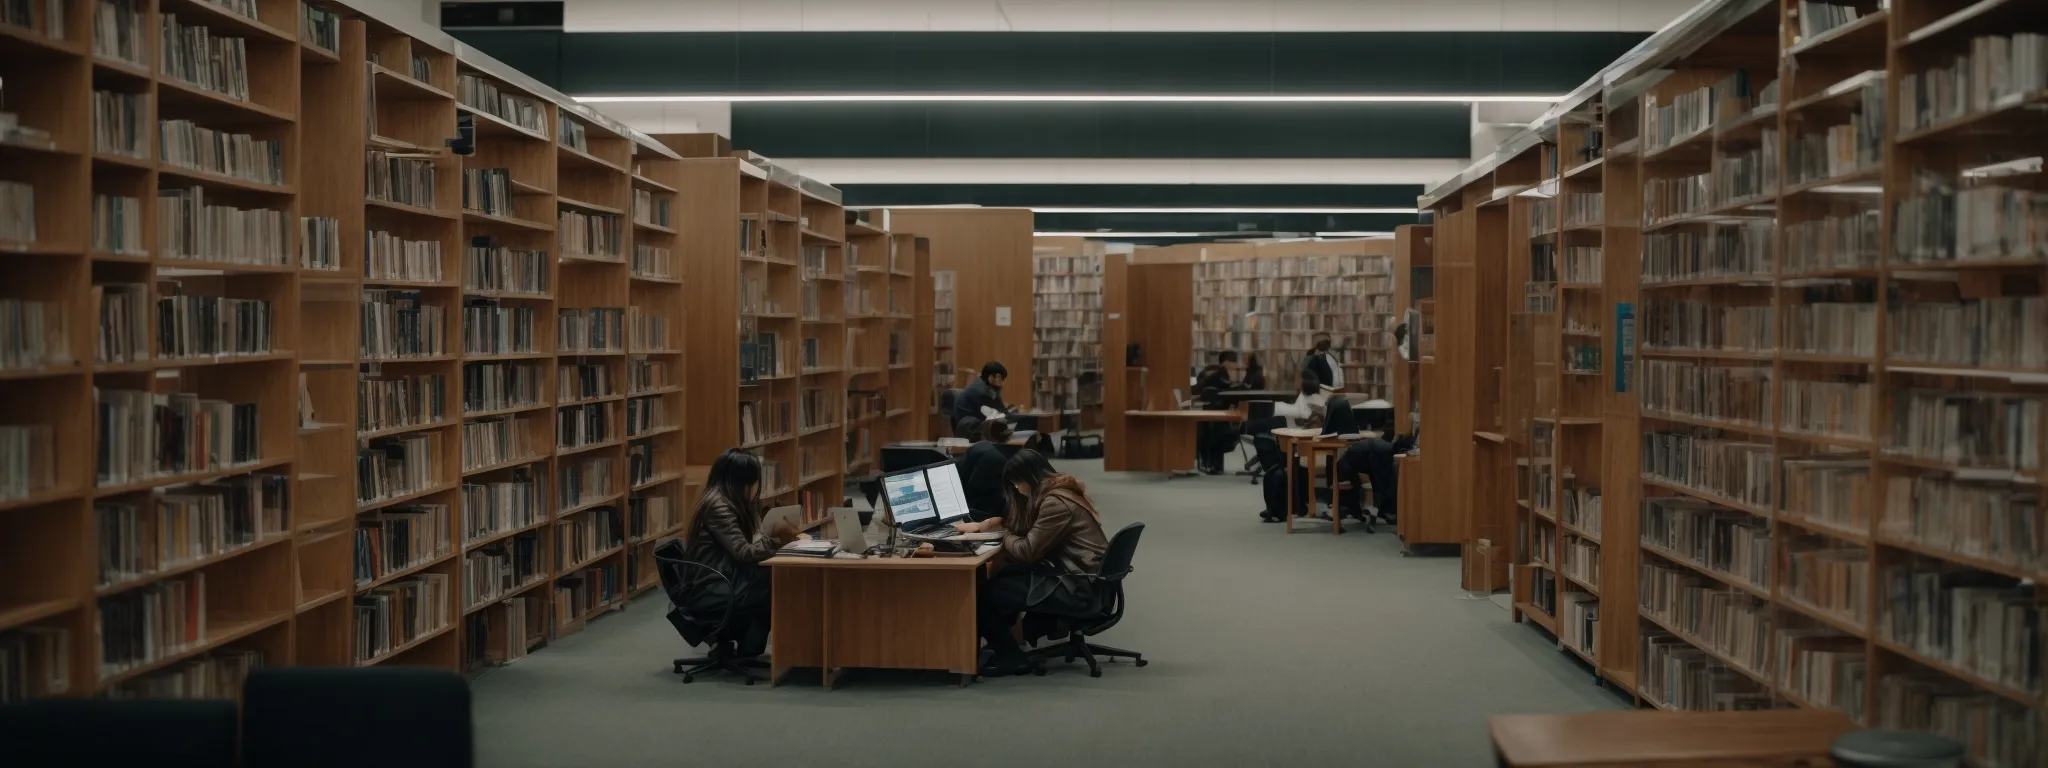 a serene library with people quietly studying seo strategies on their laptops amidst rows of digital marketing books.